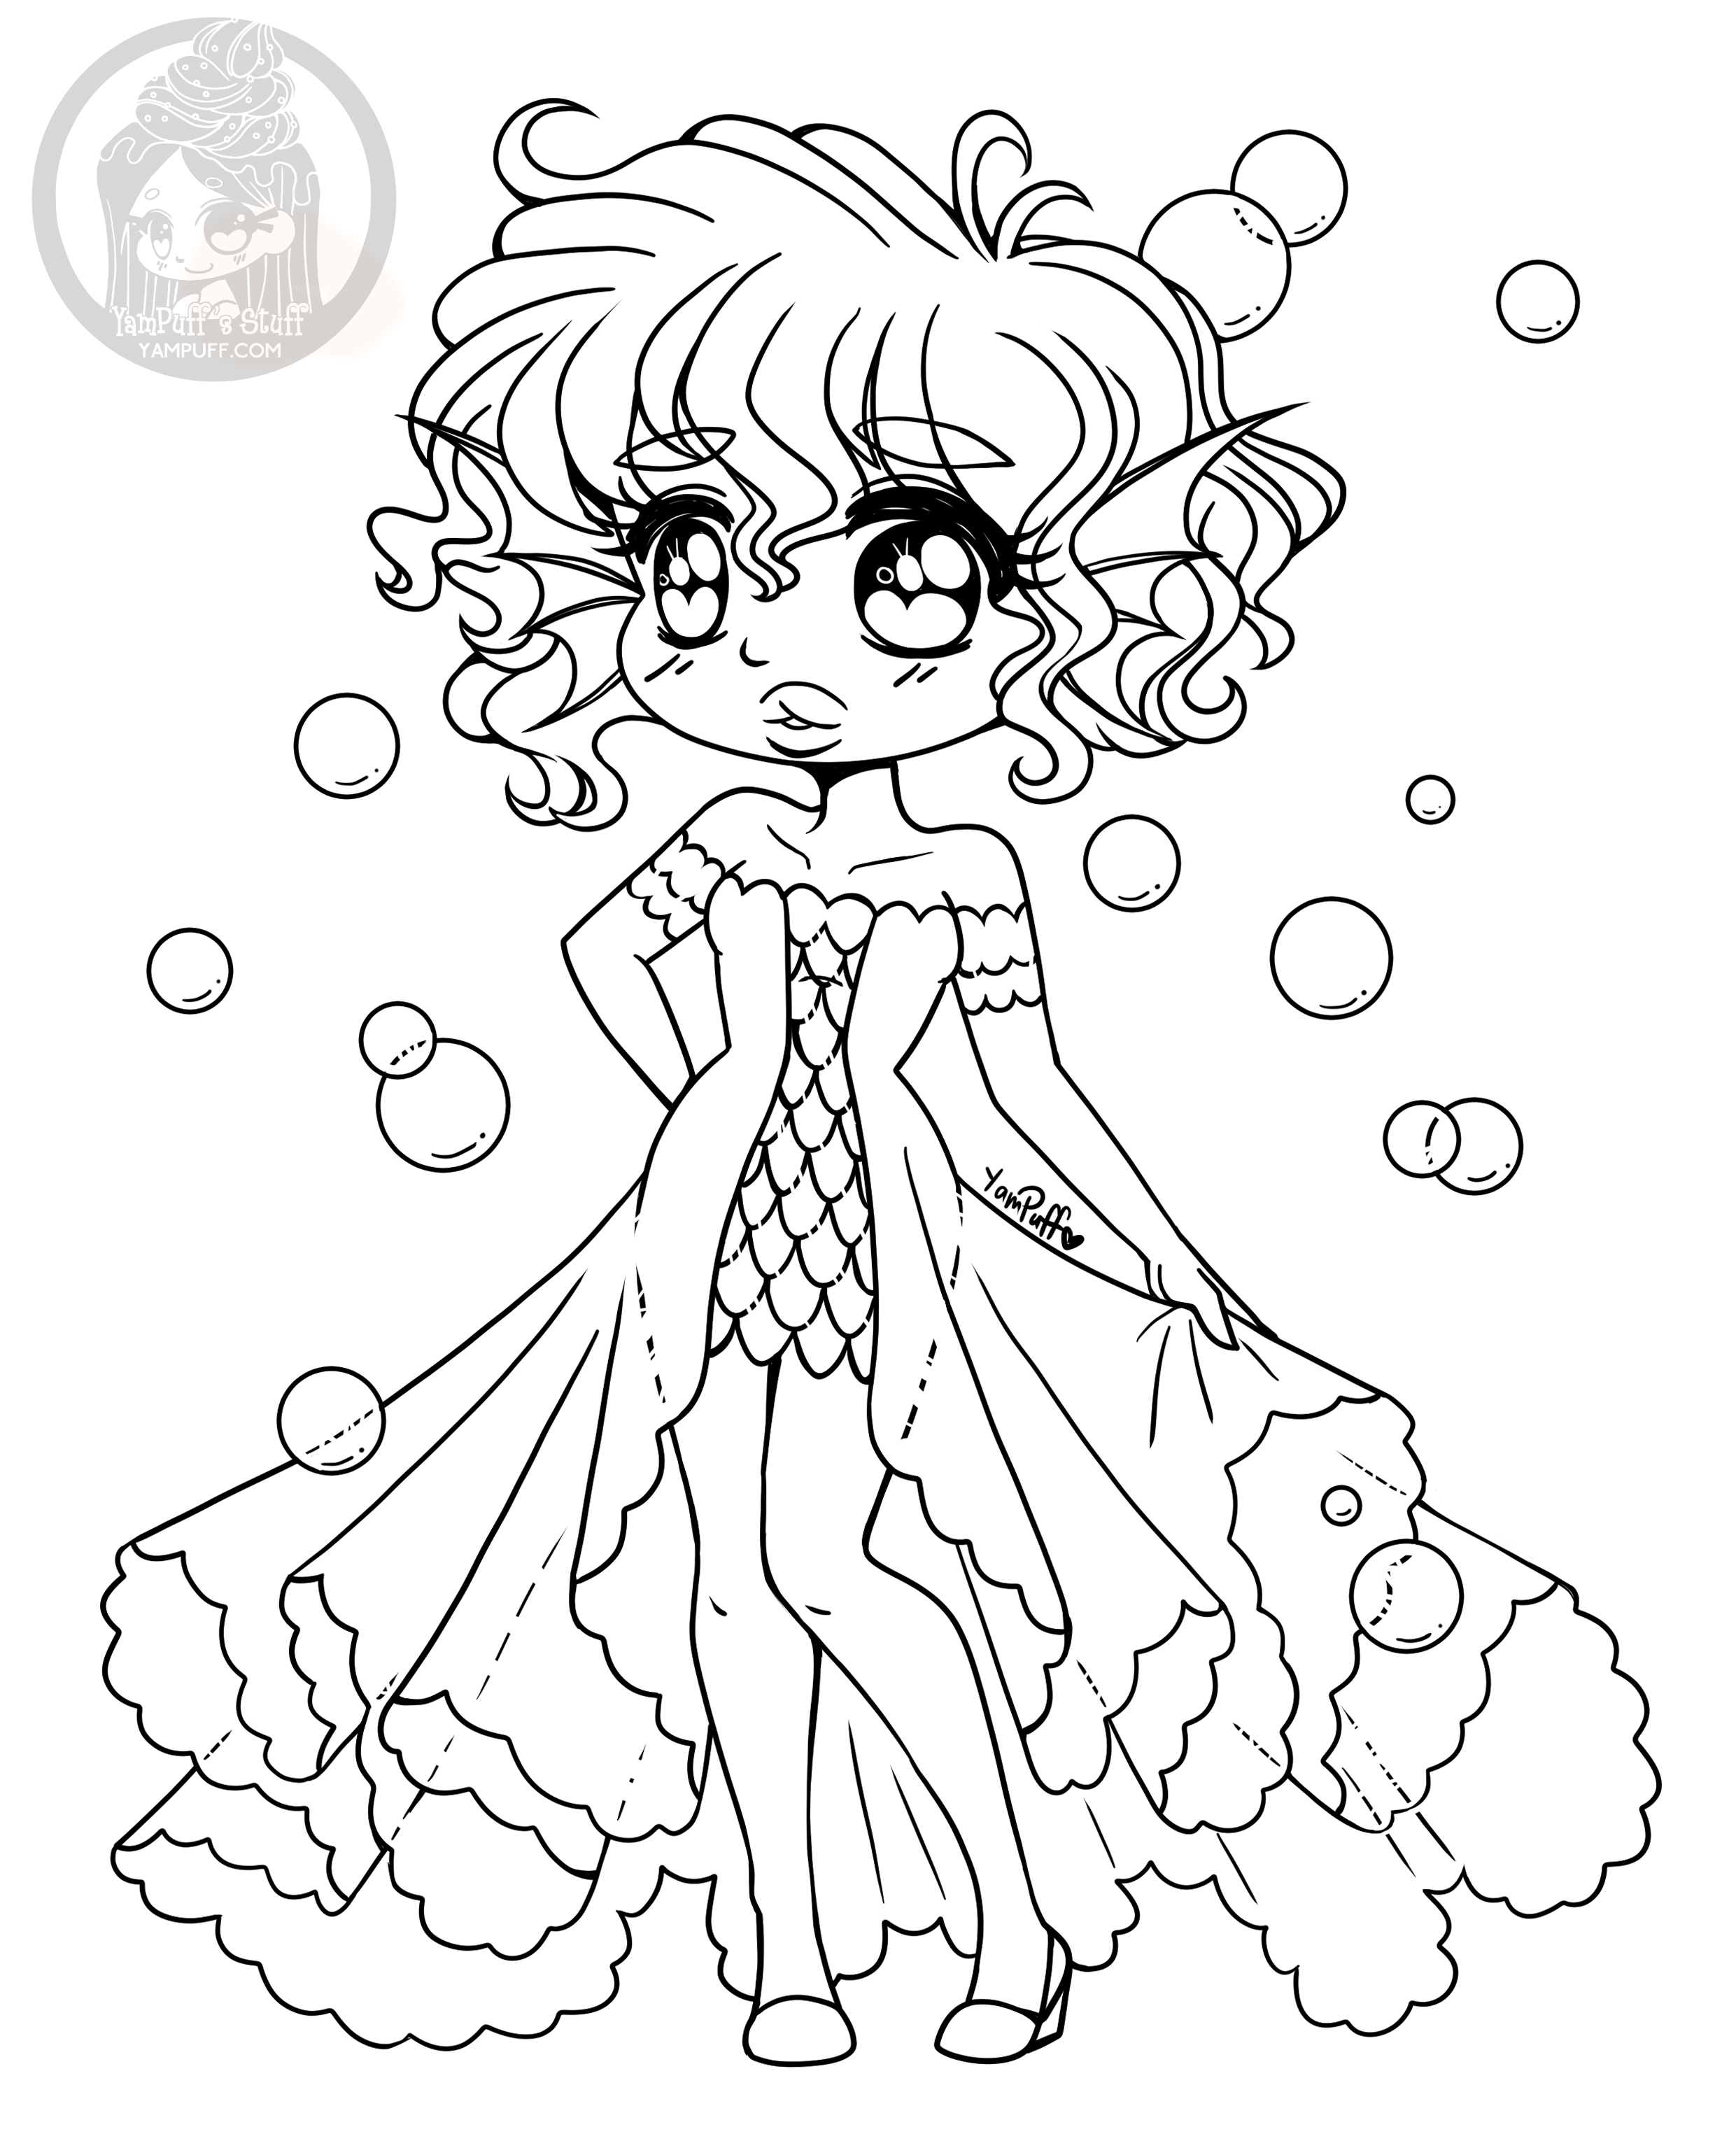 Underwater chibi coloring page by â s stuff